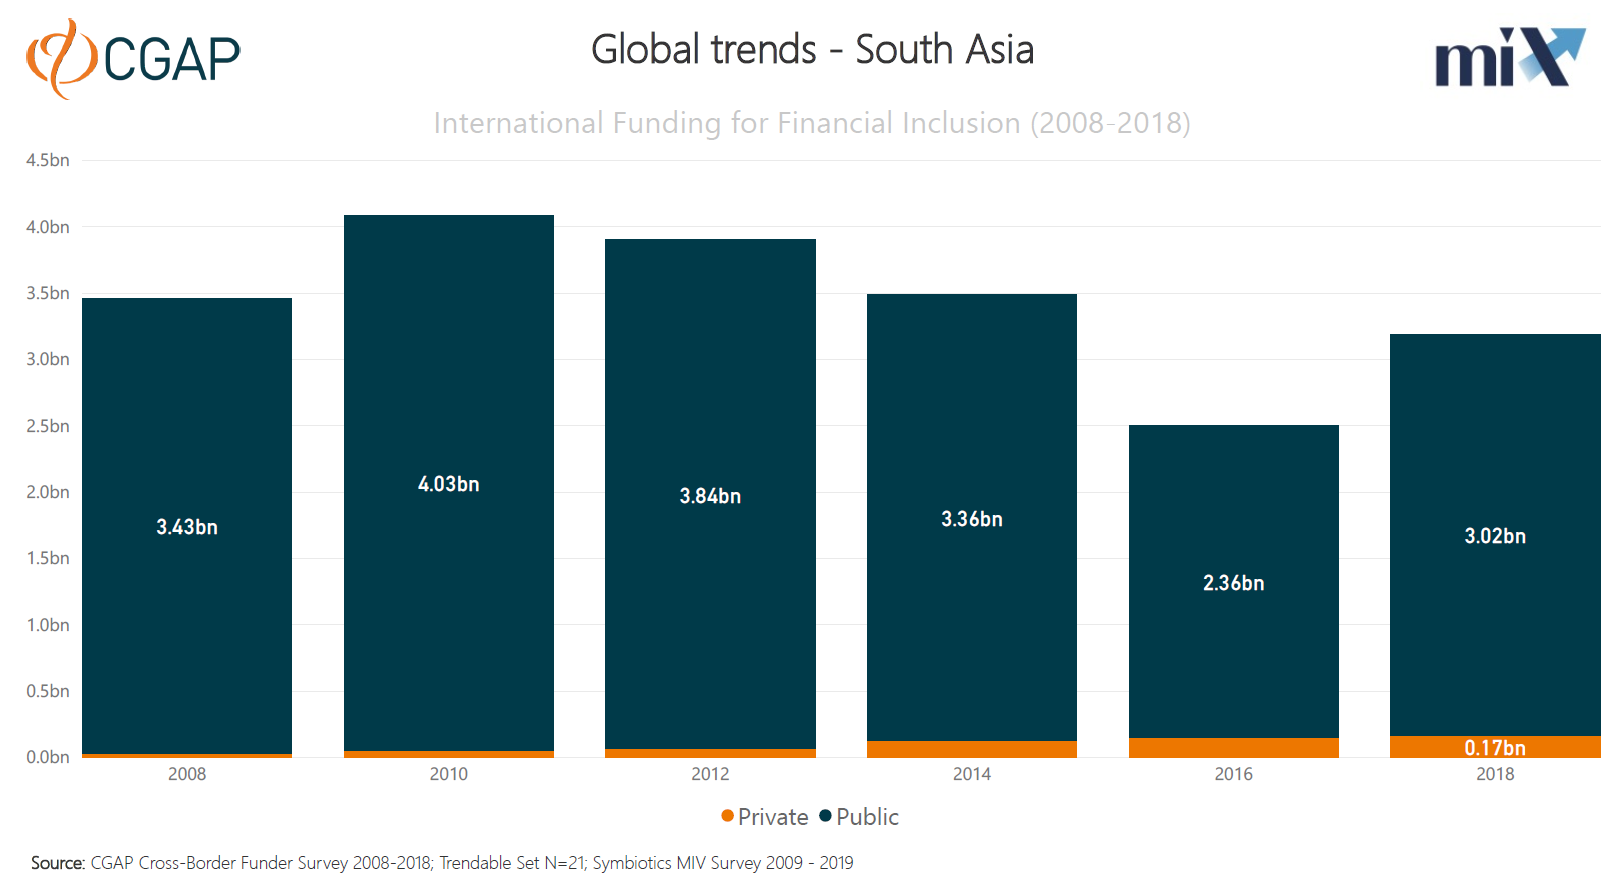 International Funding Trends for Financial Inclusion, South Asia (2009 - 2018)